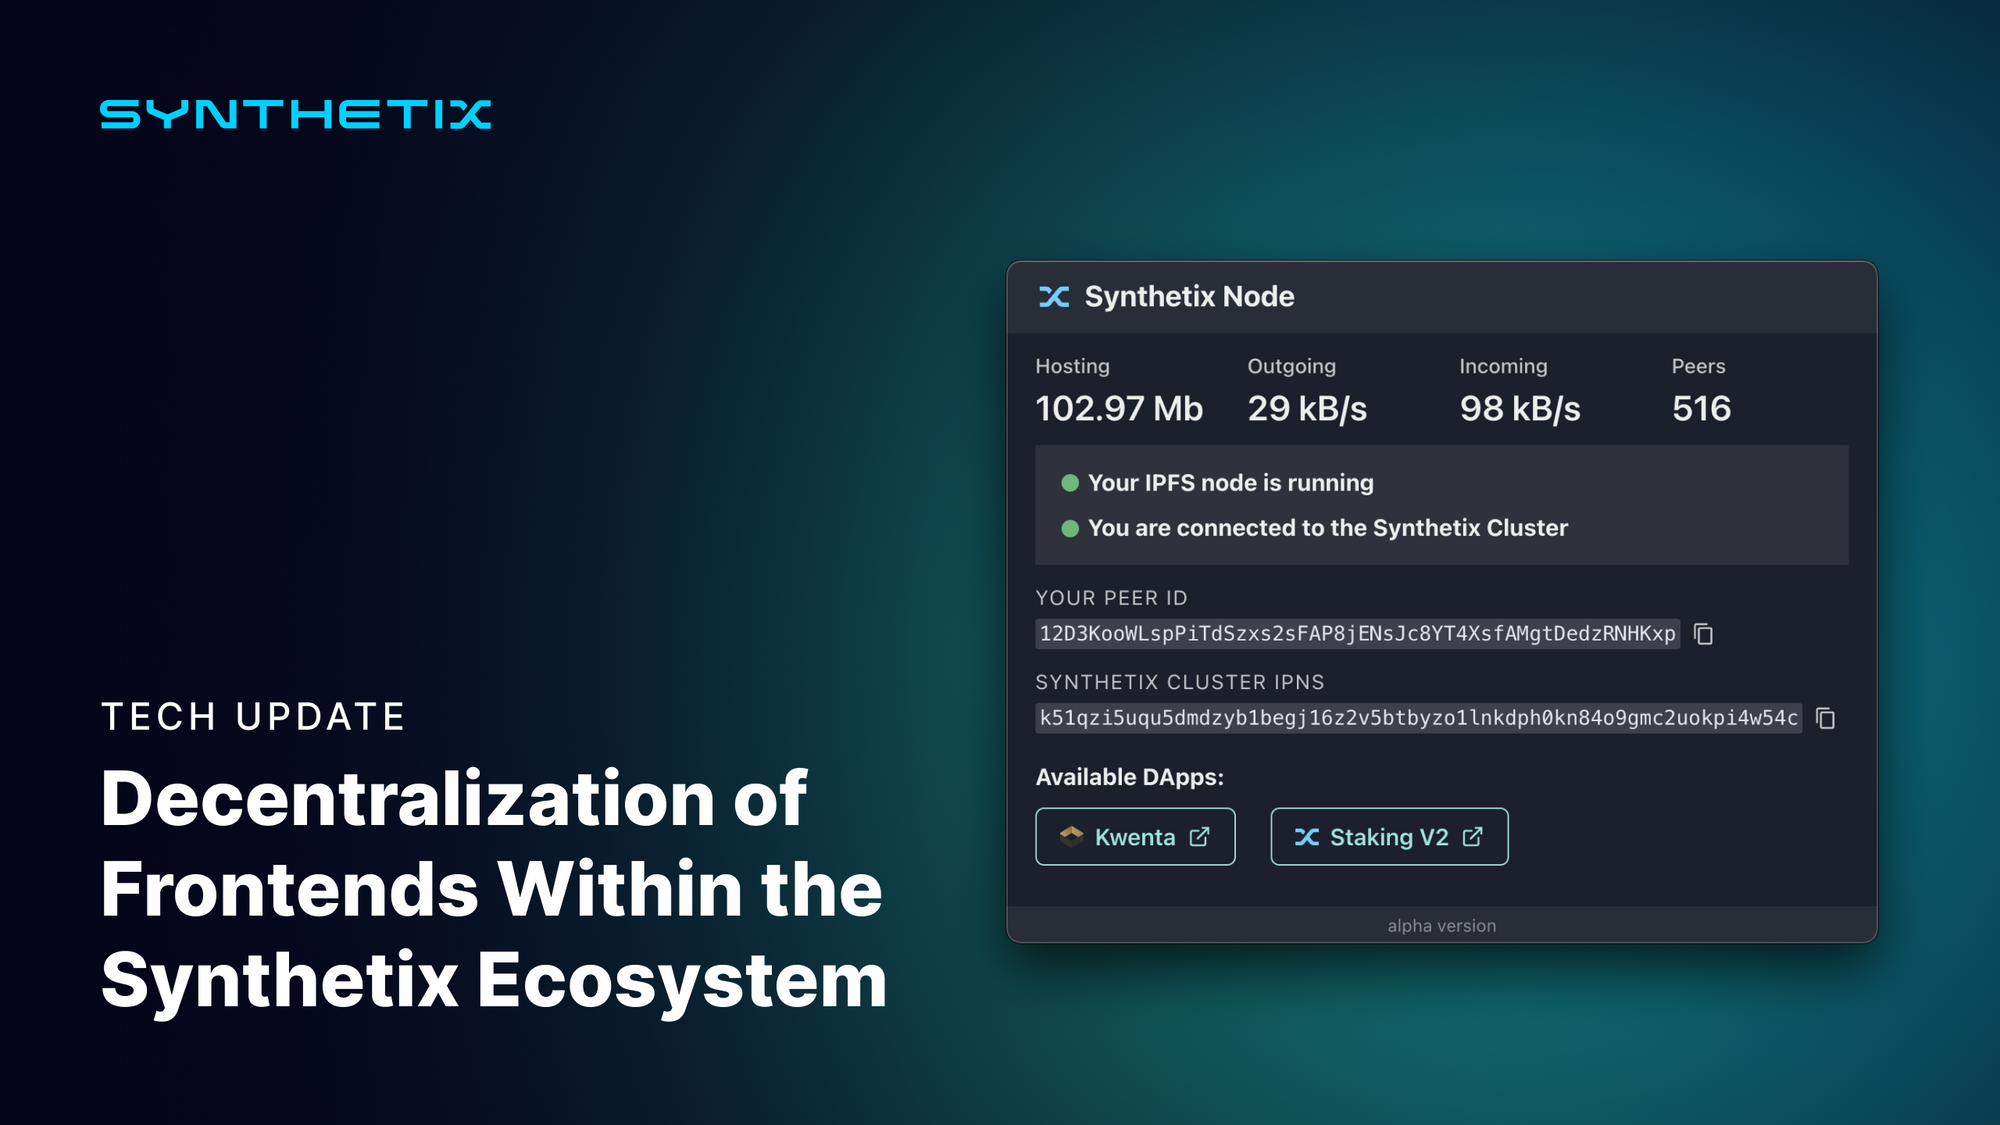 Decentralization of Frontends within the Synthetix Ecosystem